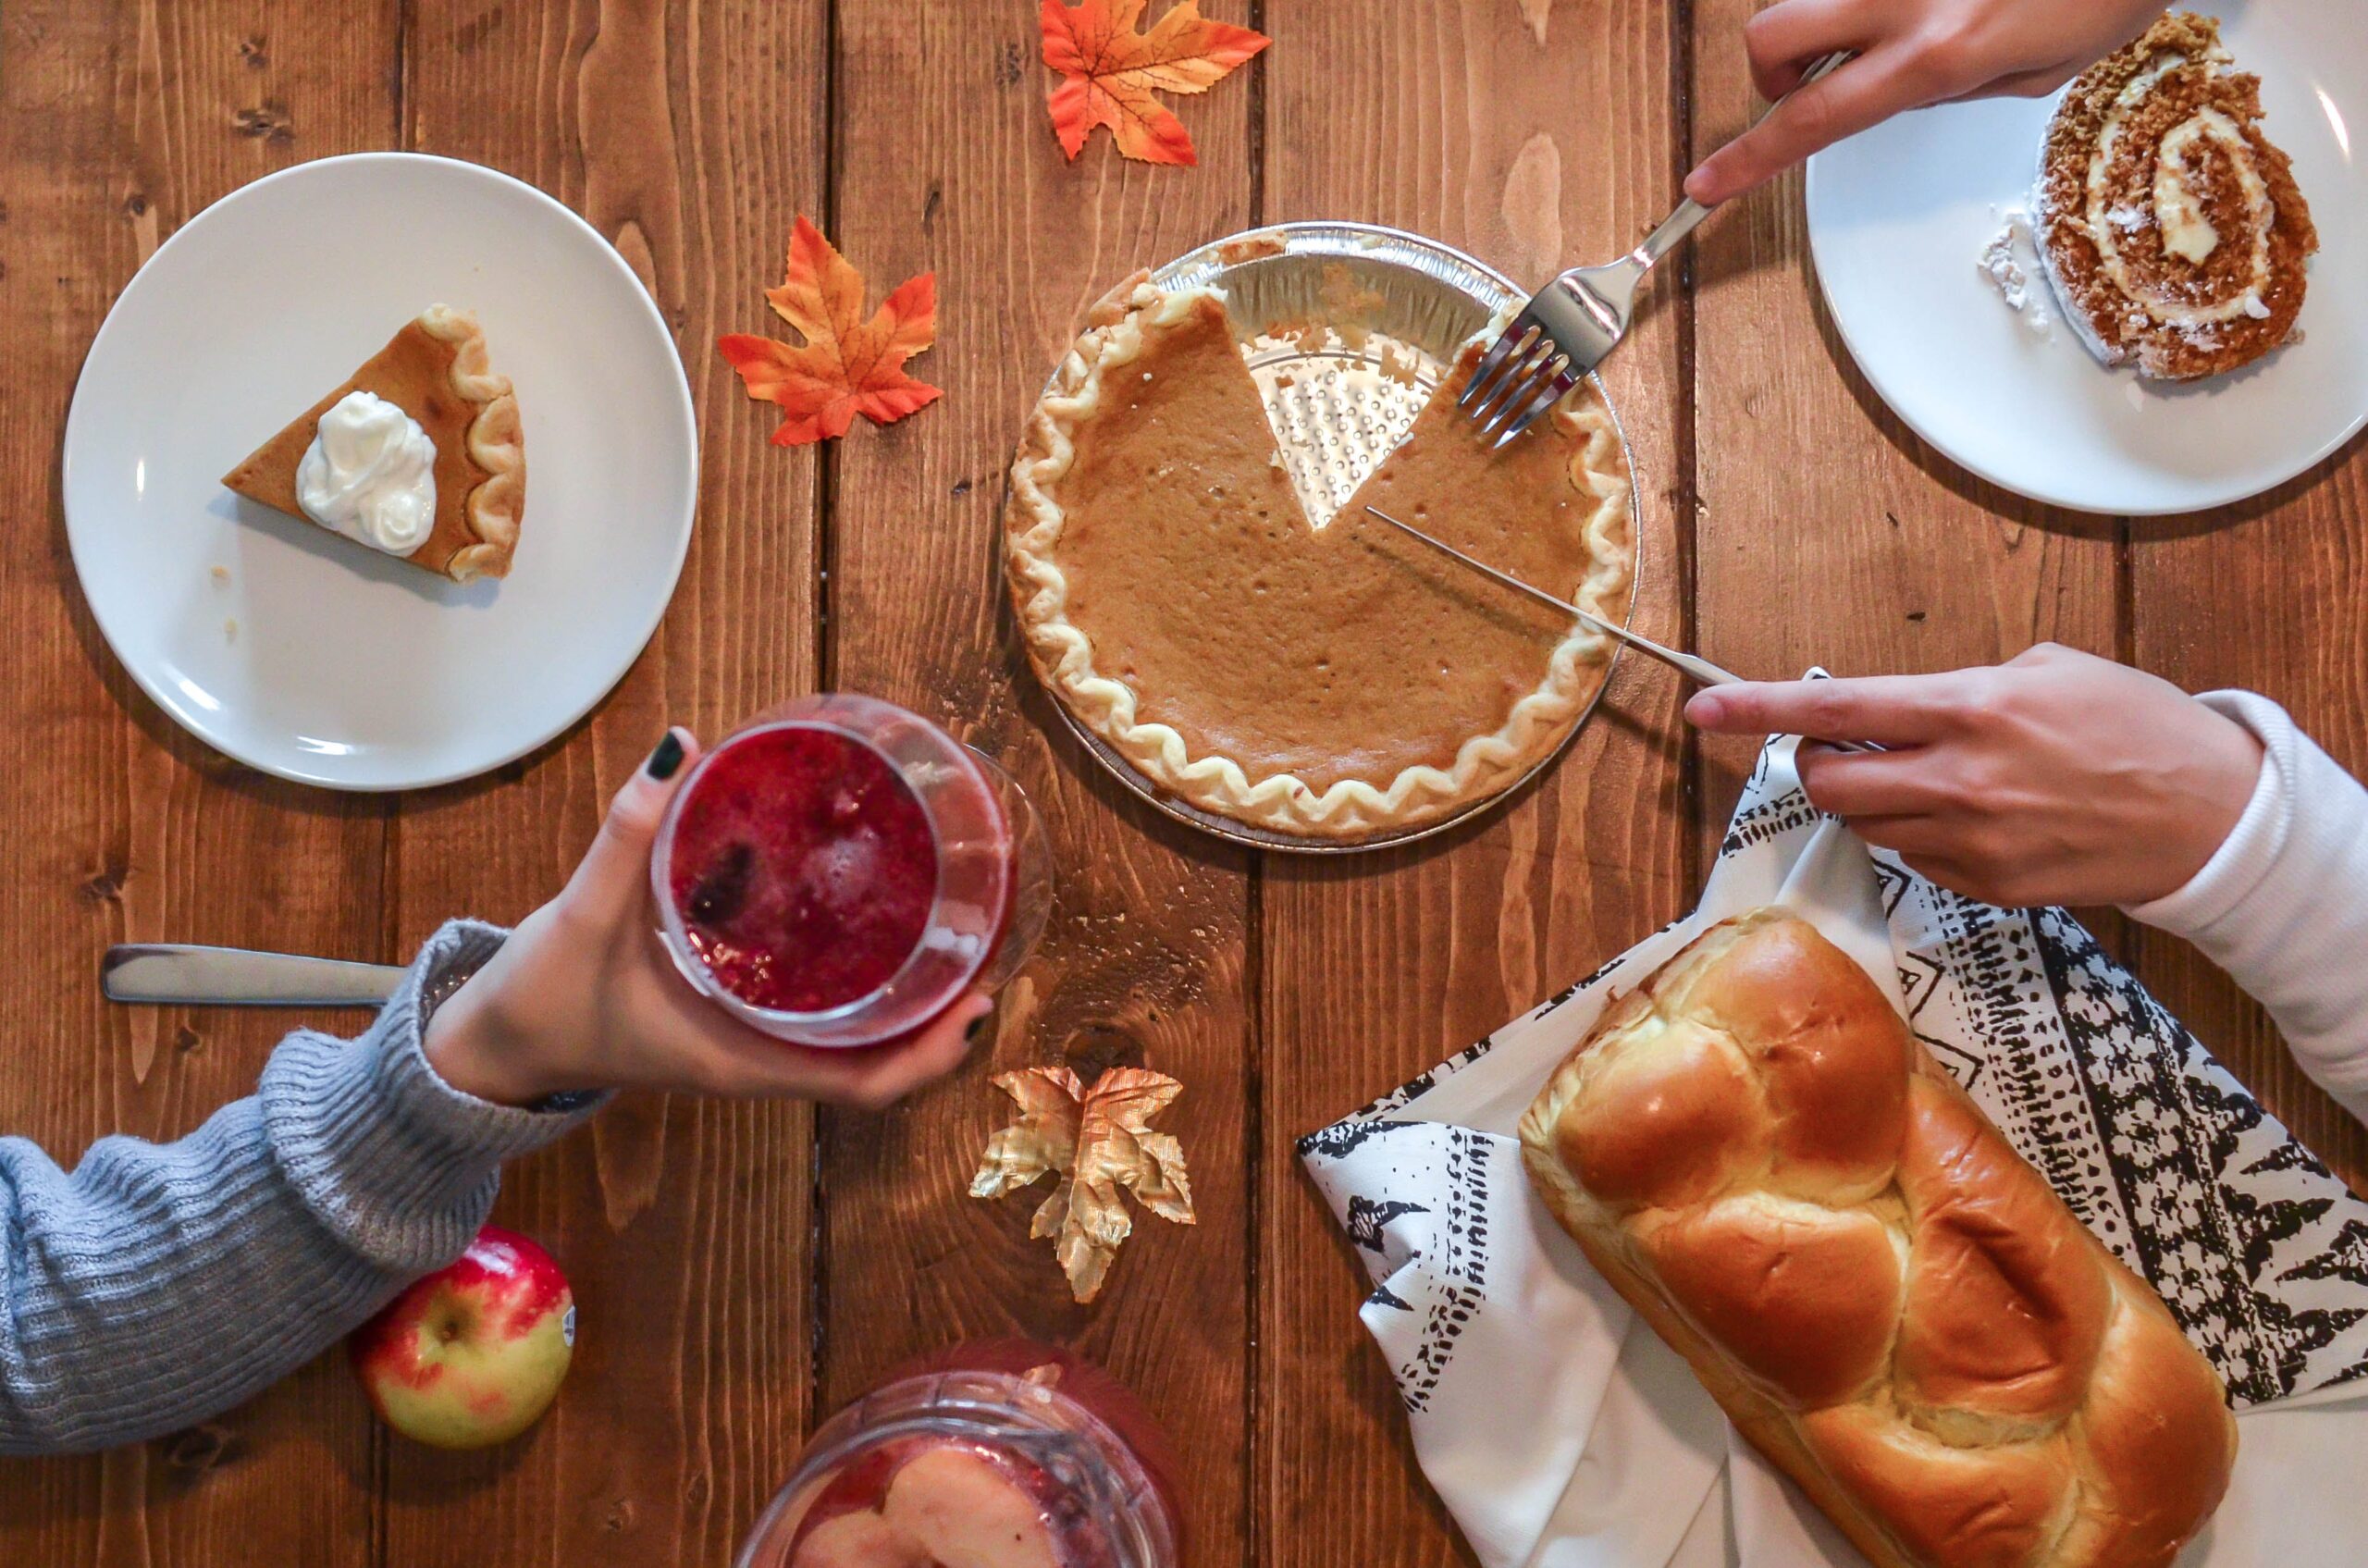 Someone's hands cut into a pumpkin pie with other Thanksgiving foods on the table